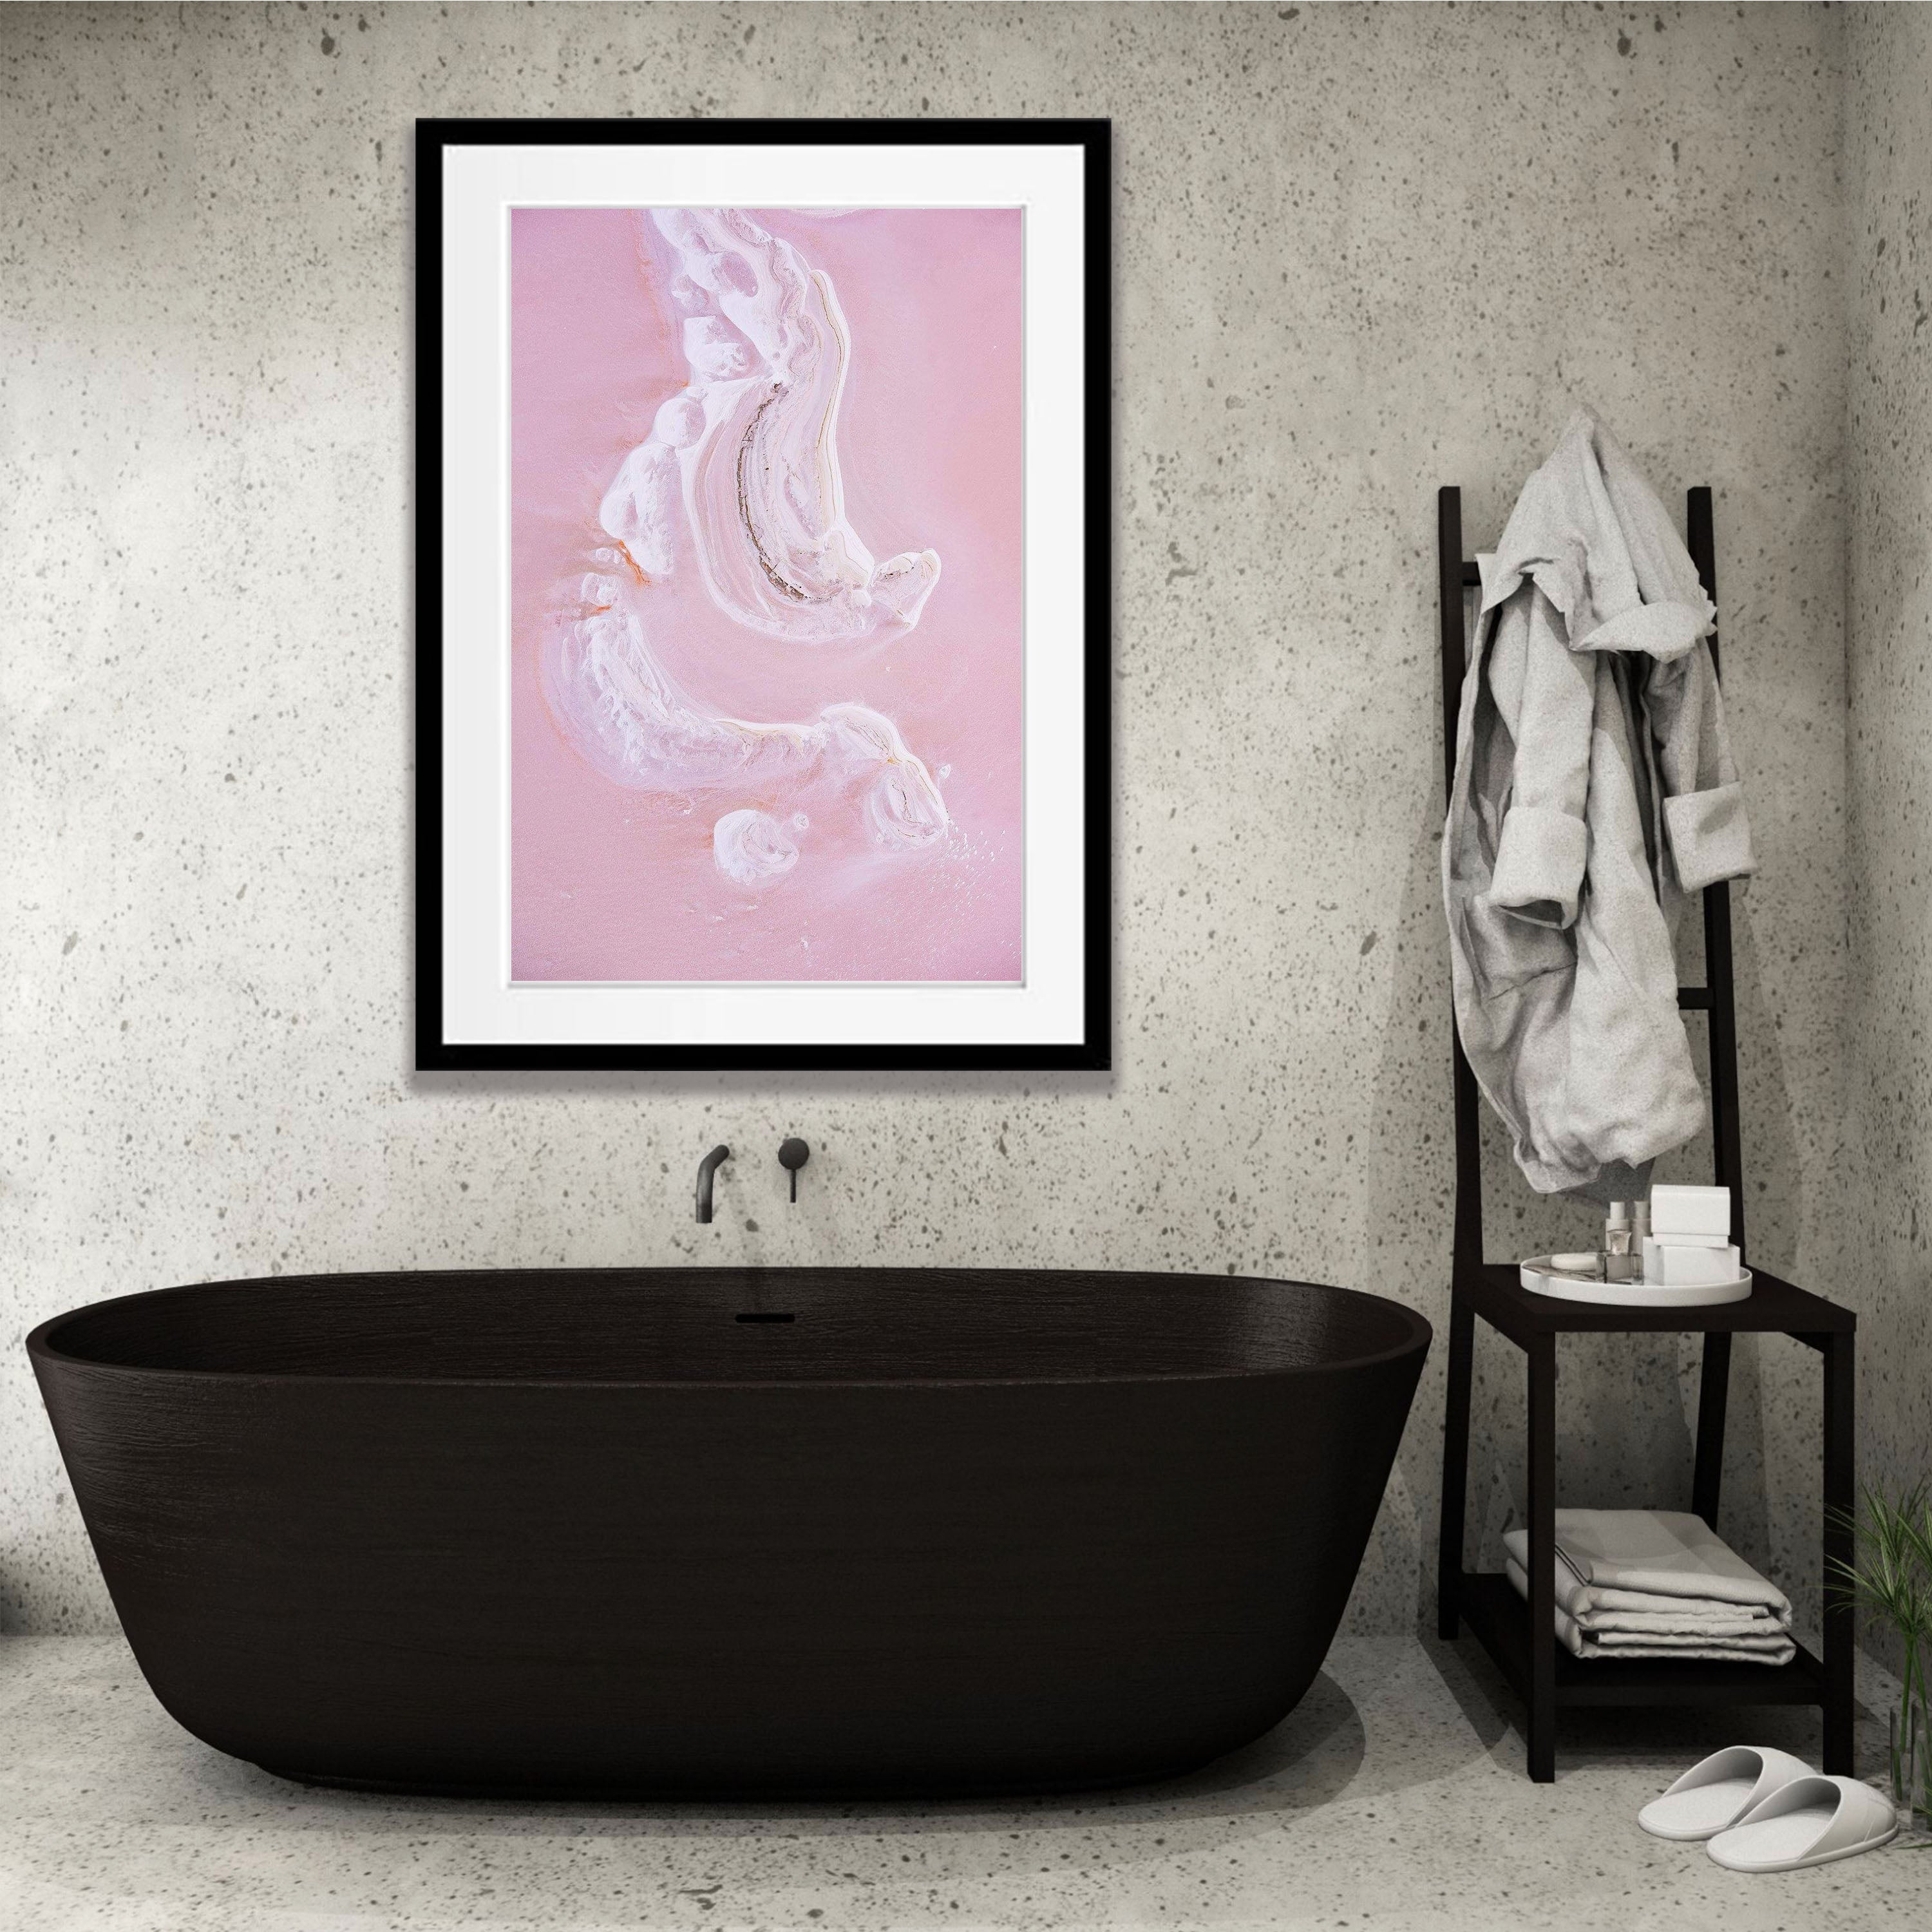 ARTWORK INSTOCK - 'Nature's Womb' - Available 150 x 120cms Mounted Print (ready to frame) in the gallery TODAY!